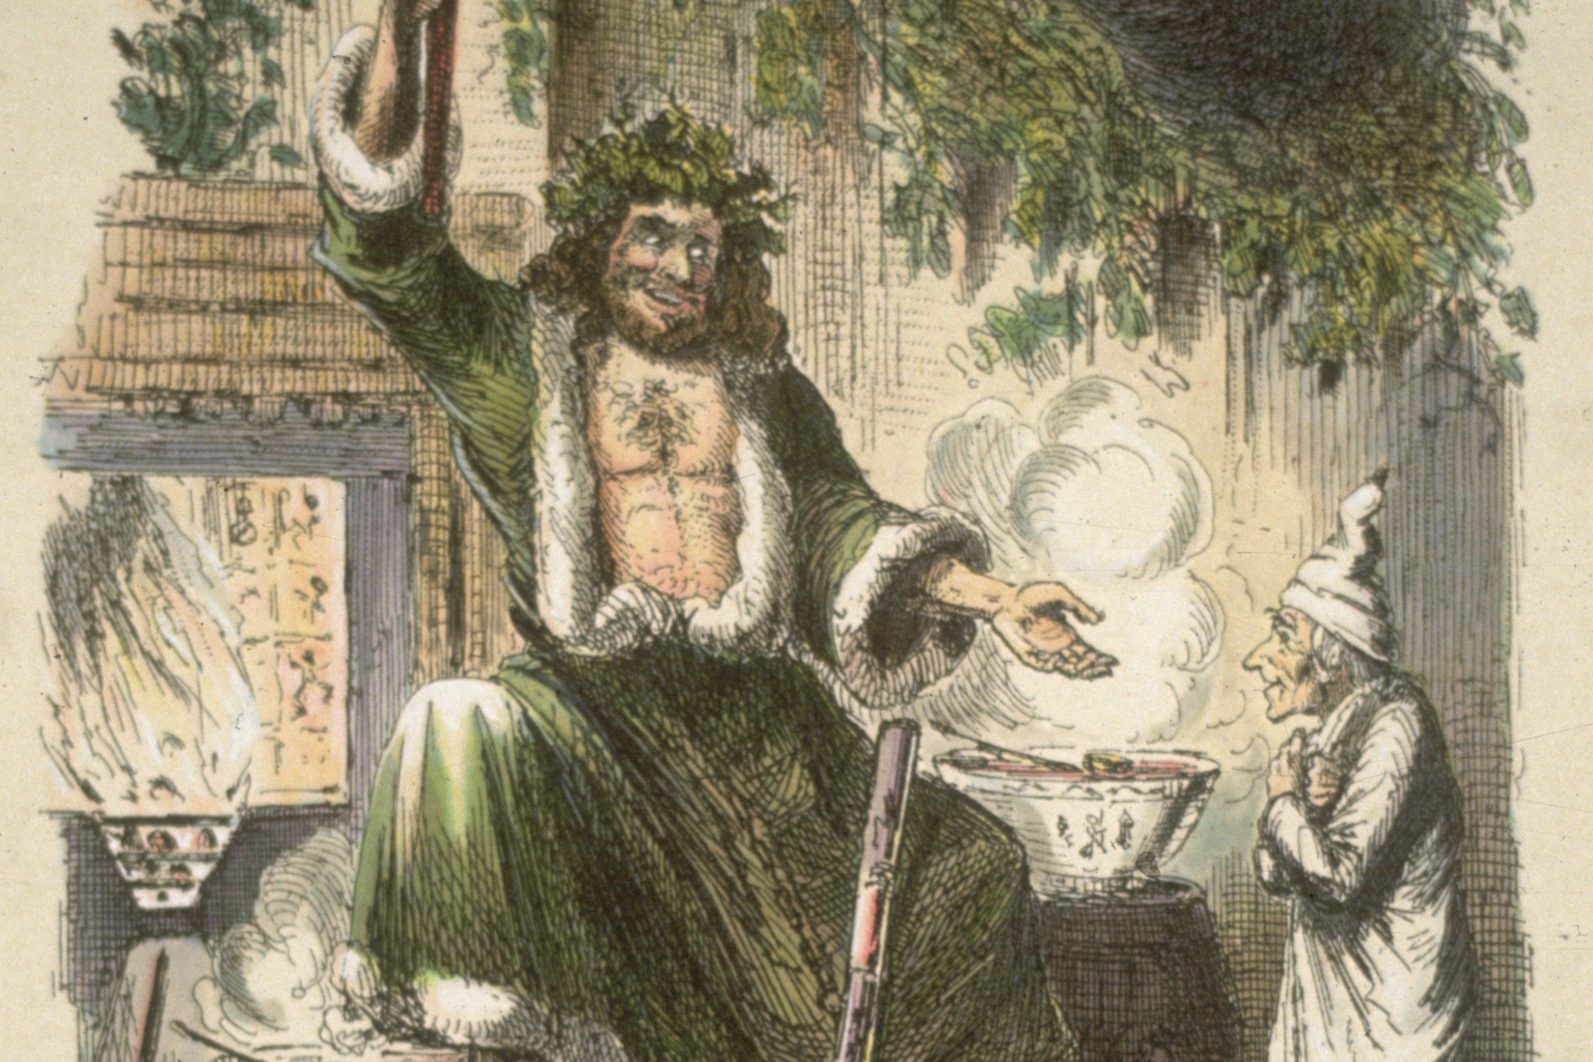 <p>England's Father Christmas started not as a saint but as a festive allegorical figure clad in green who epitomized the "making merry" part of Christmas. In Charles Dickens's classic <a href="https://www.rd.com/list/christmas-books/" rel="noopener noreferrer">Christmas book</a> <em>A Christmas Carol</em>, which helped create the modern holiday, there is no Father Christmas or Santa—but the Ghost of Christmas Present is very similar. "If you look at the pictures that originally accompanied that story, he looks a lot like Santa Claus: bearded, jolly, but he's merry old Christmas. He's not Santa Claus. That name is never mentioned at all." Eventually, though, Father Christmas and the American Santa became one and the same.</p>